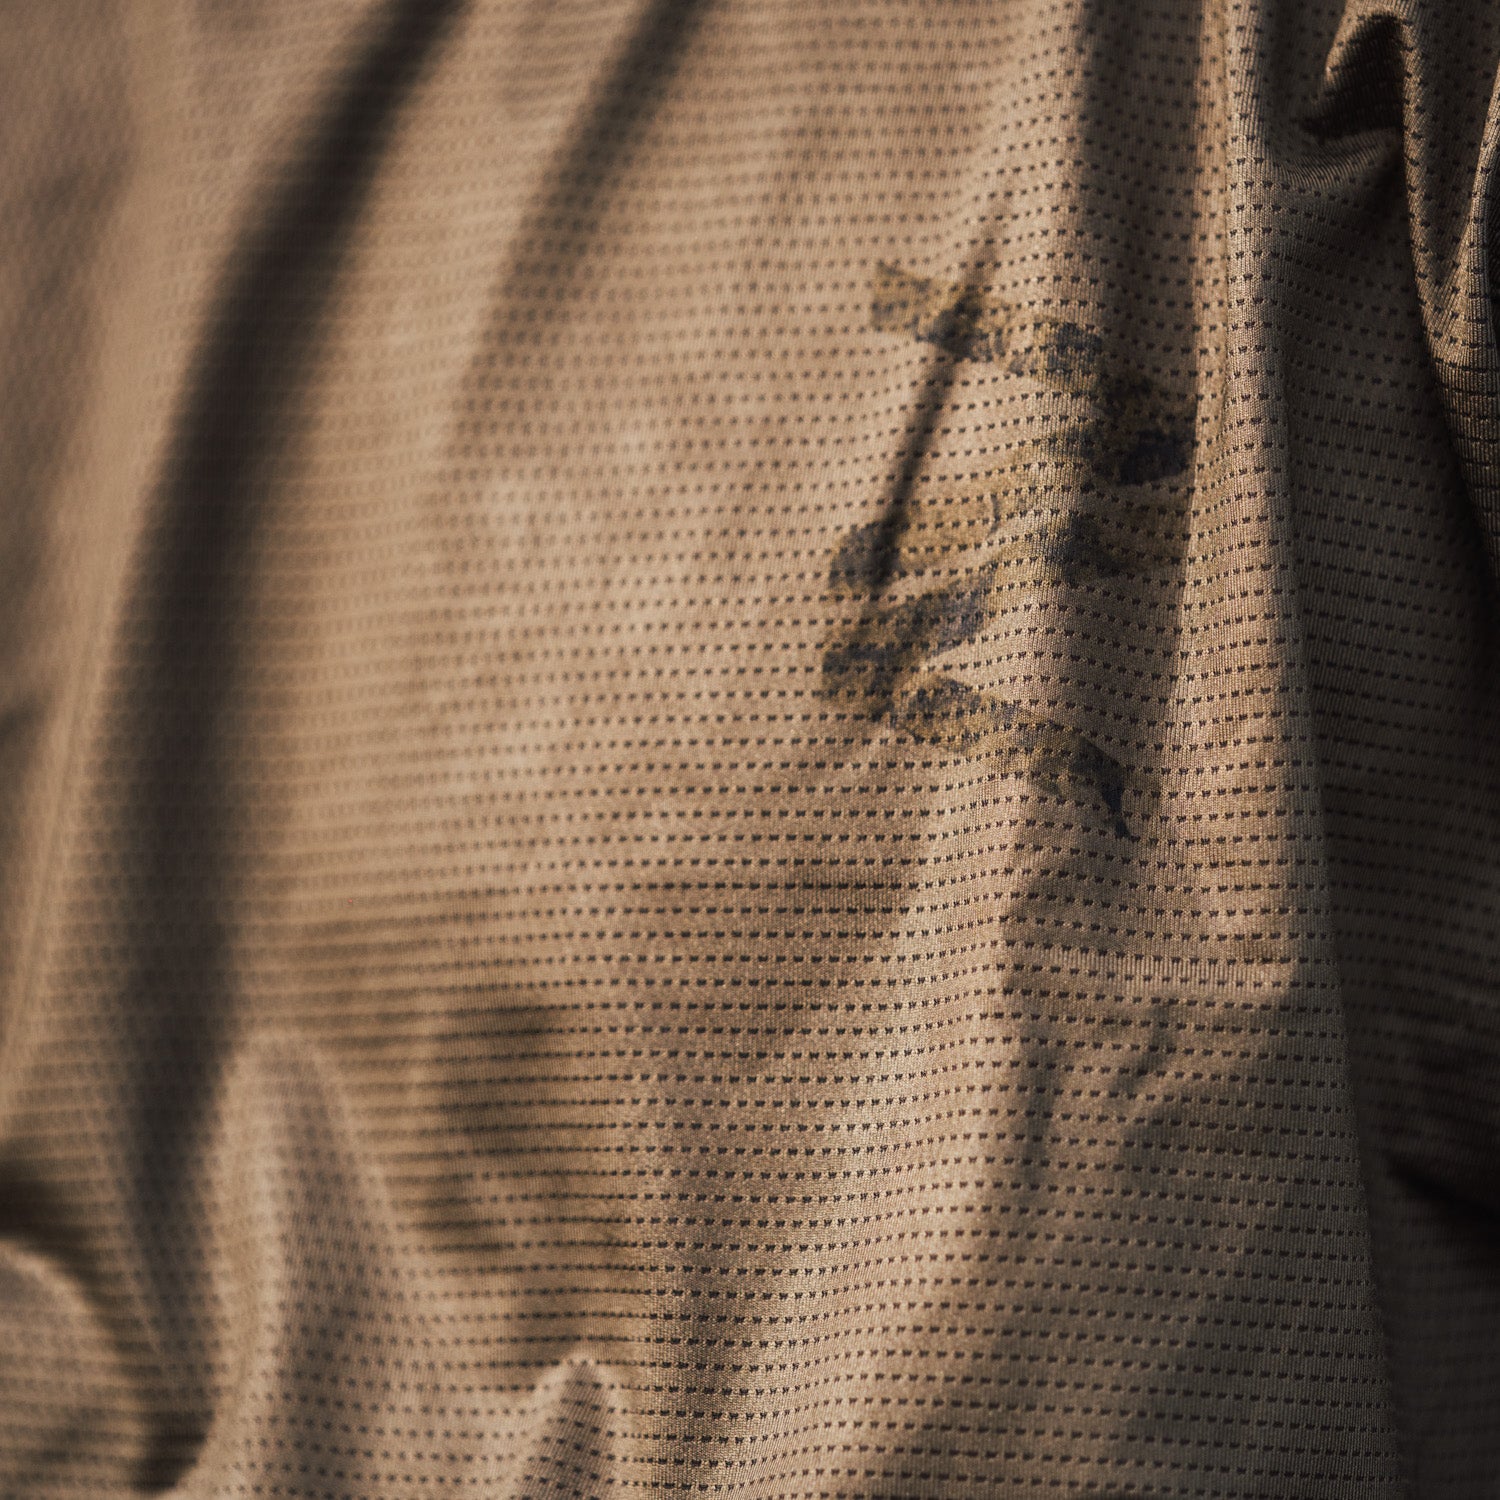 Stretchable and sustainable khaki jersey for mountain biking, tailored for long-sleeve comfort in downhill and enduro riding.